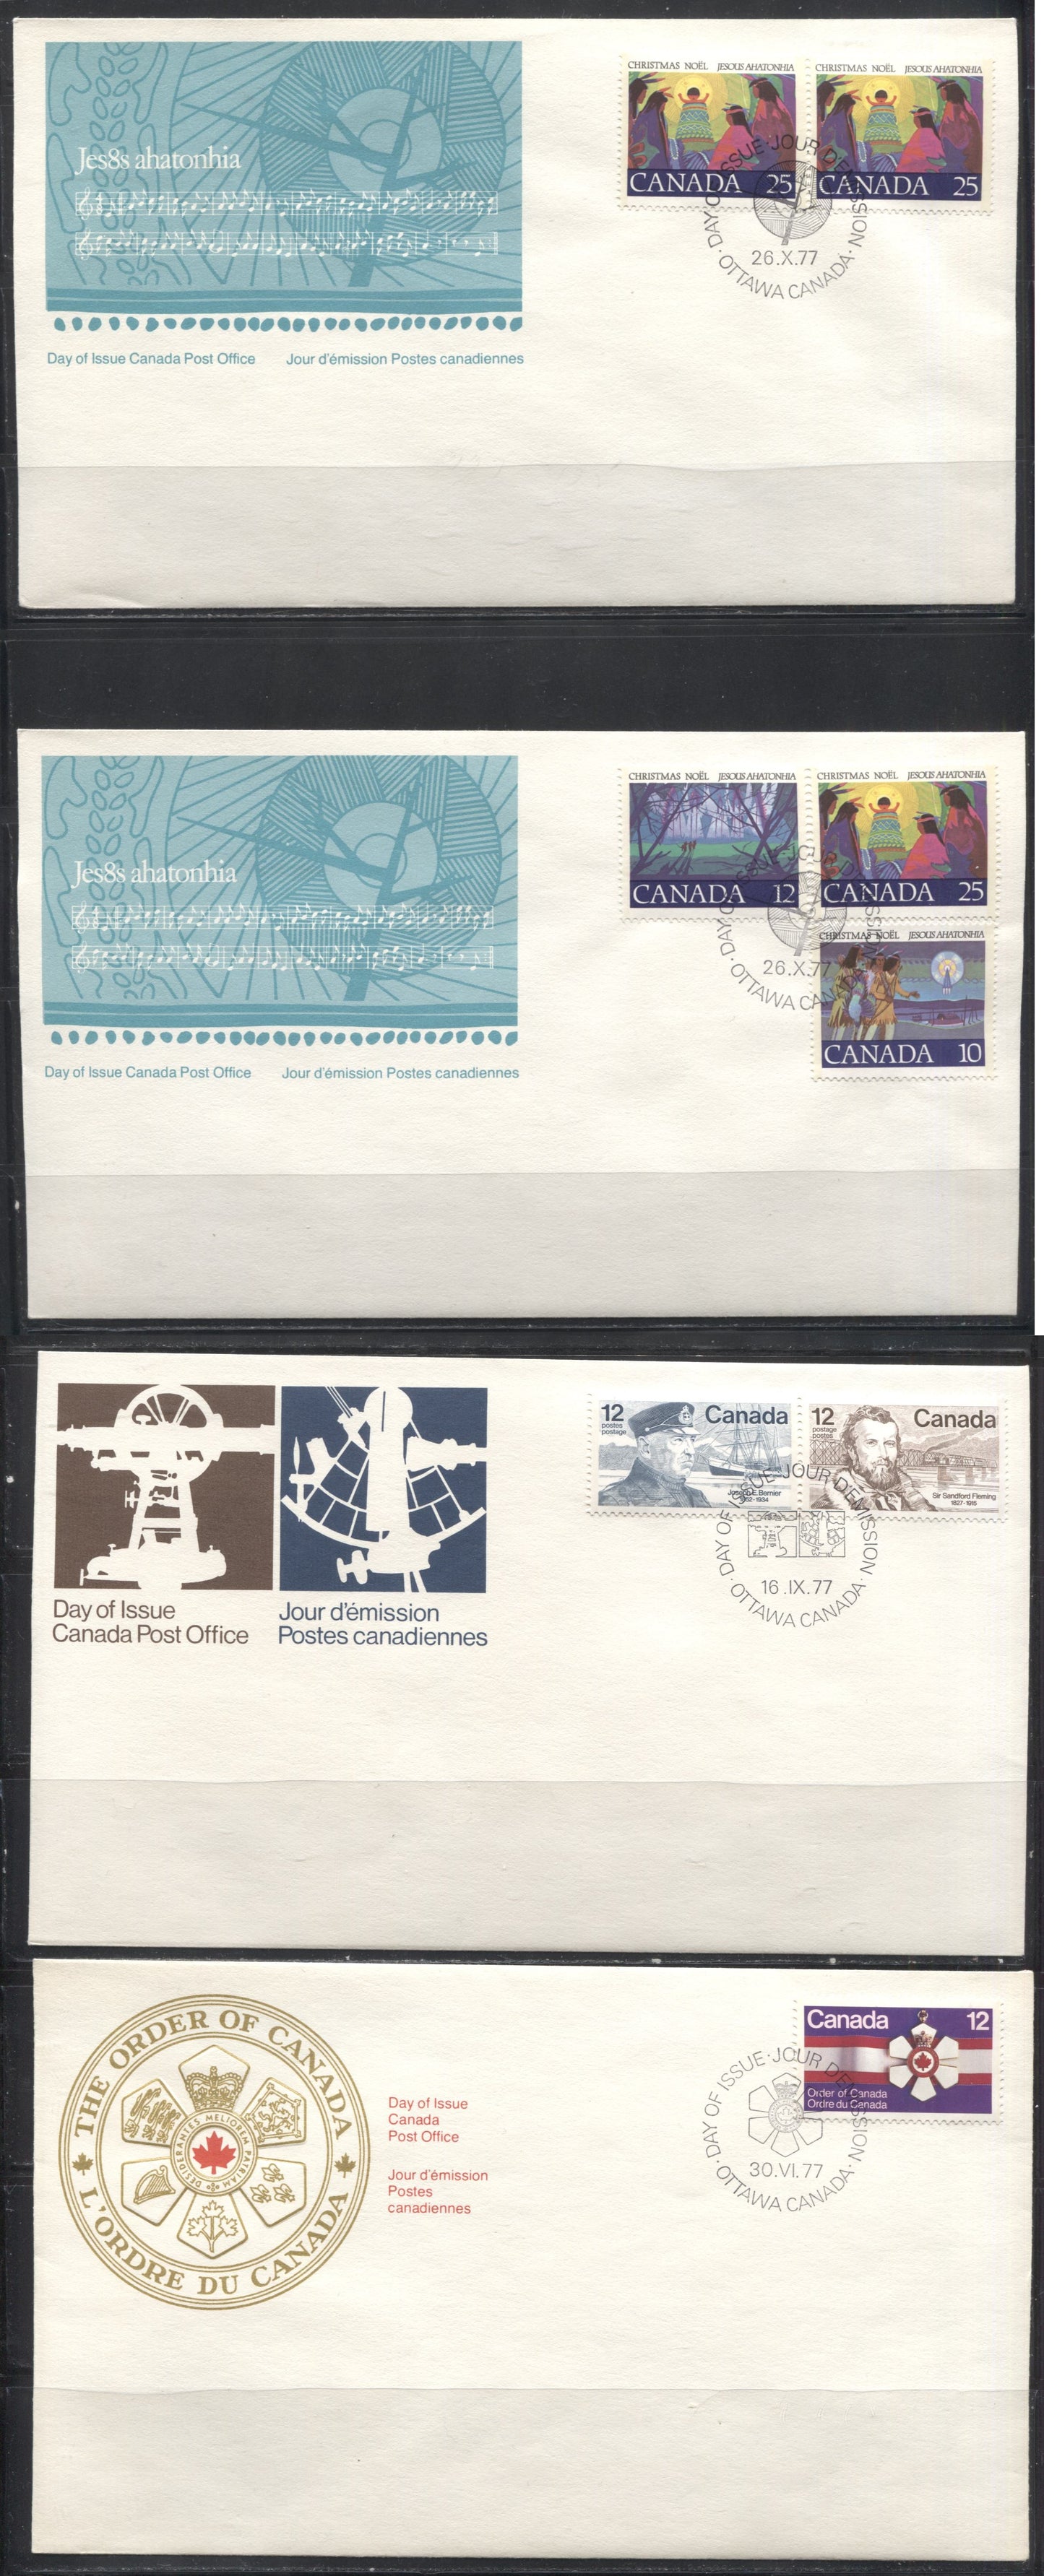 Canada #704i, 732/750 1977 Commemoratives - A Group of 15 Canada Post Official FDC's Franked With Singles, Pairs and Blocks, Different Envelope Fluorescence Levels